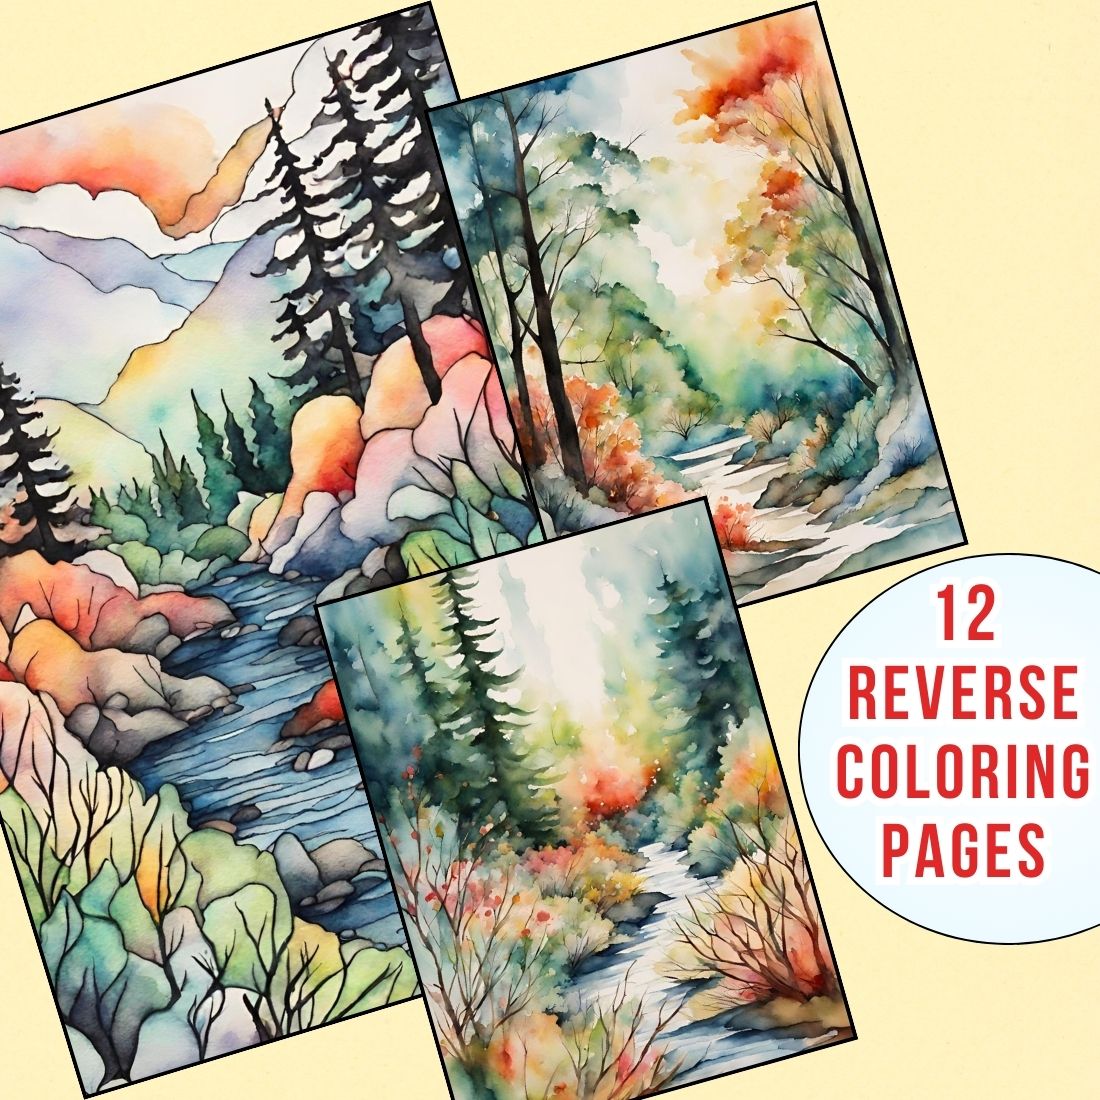 Stunning Nature Scenes Reverse Coloring Pages cover image.